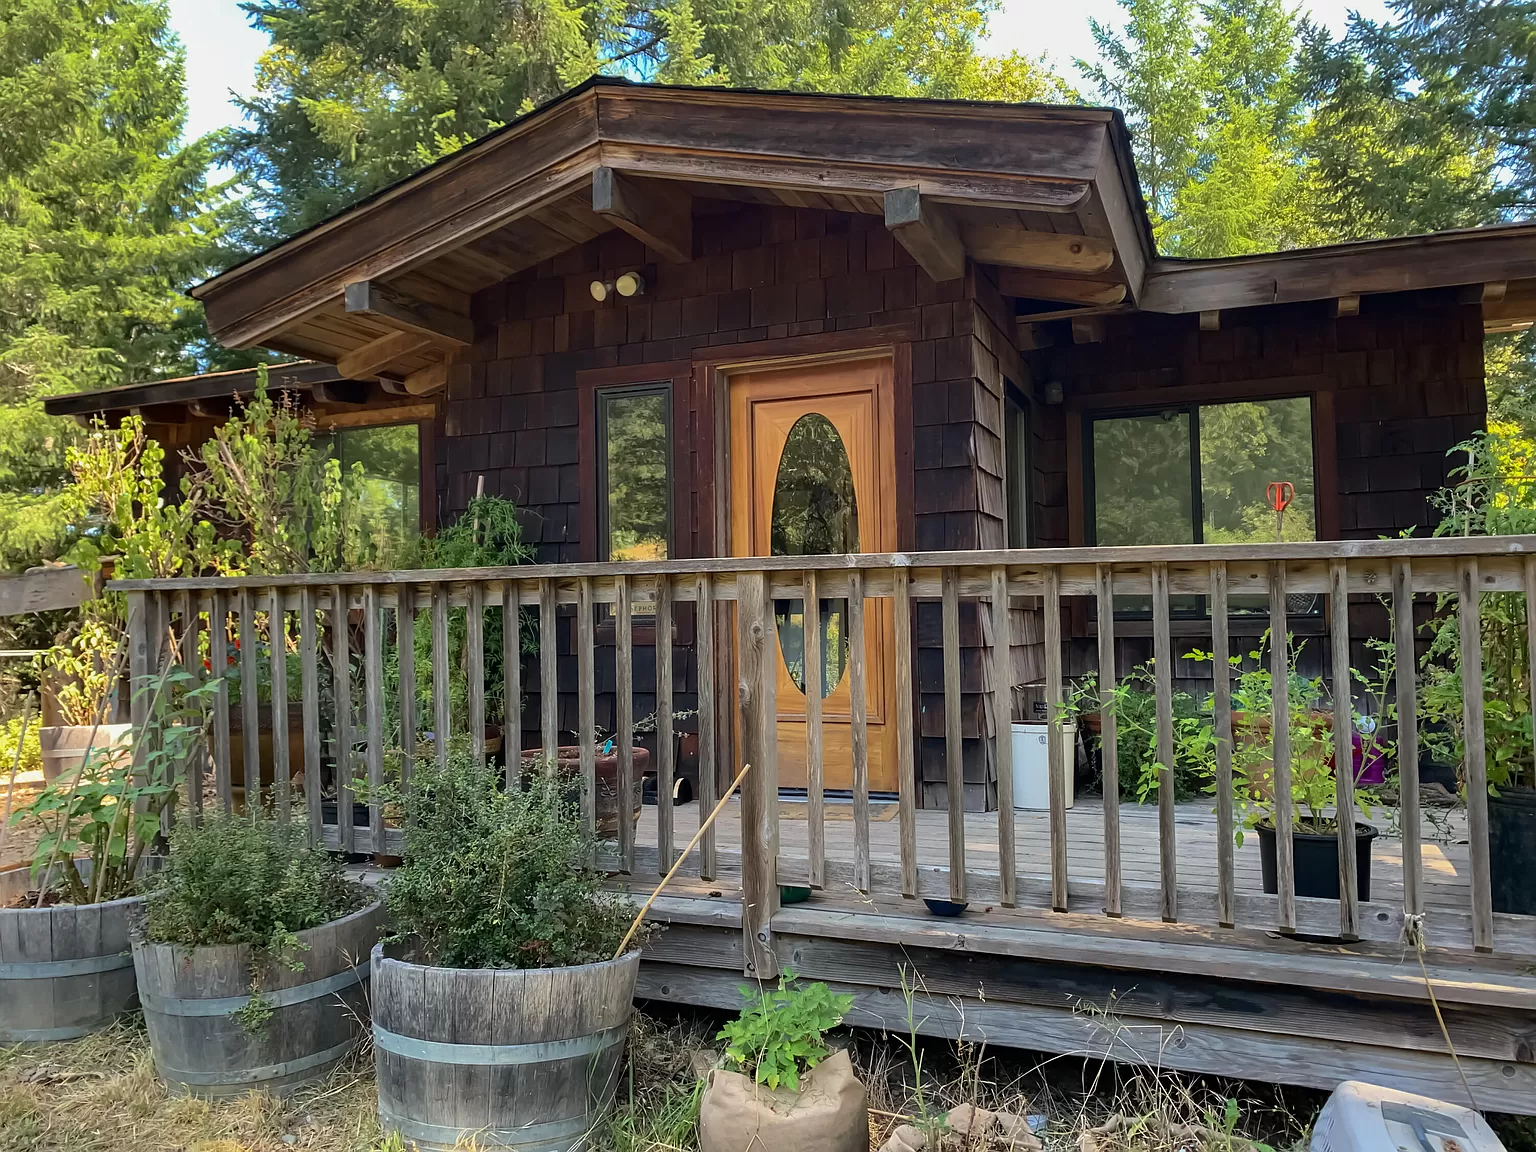 Humboldt County Cabin and Legal Weed Farm Are Listed on Zillow for $925,000